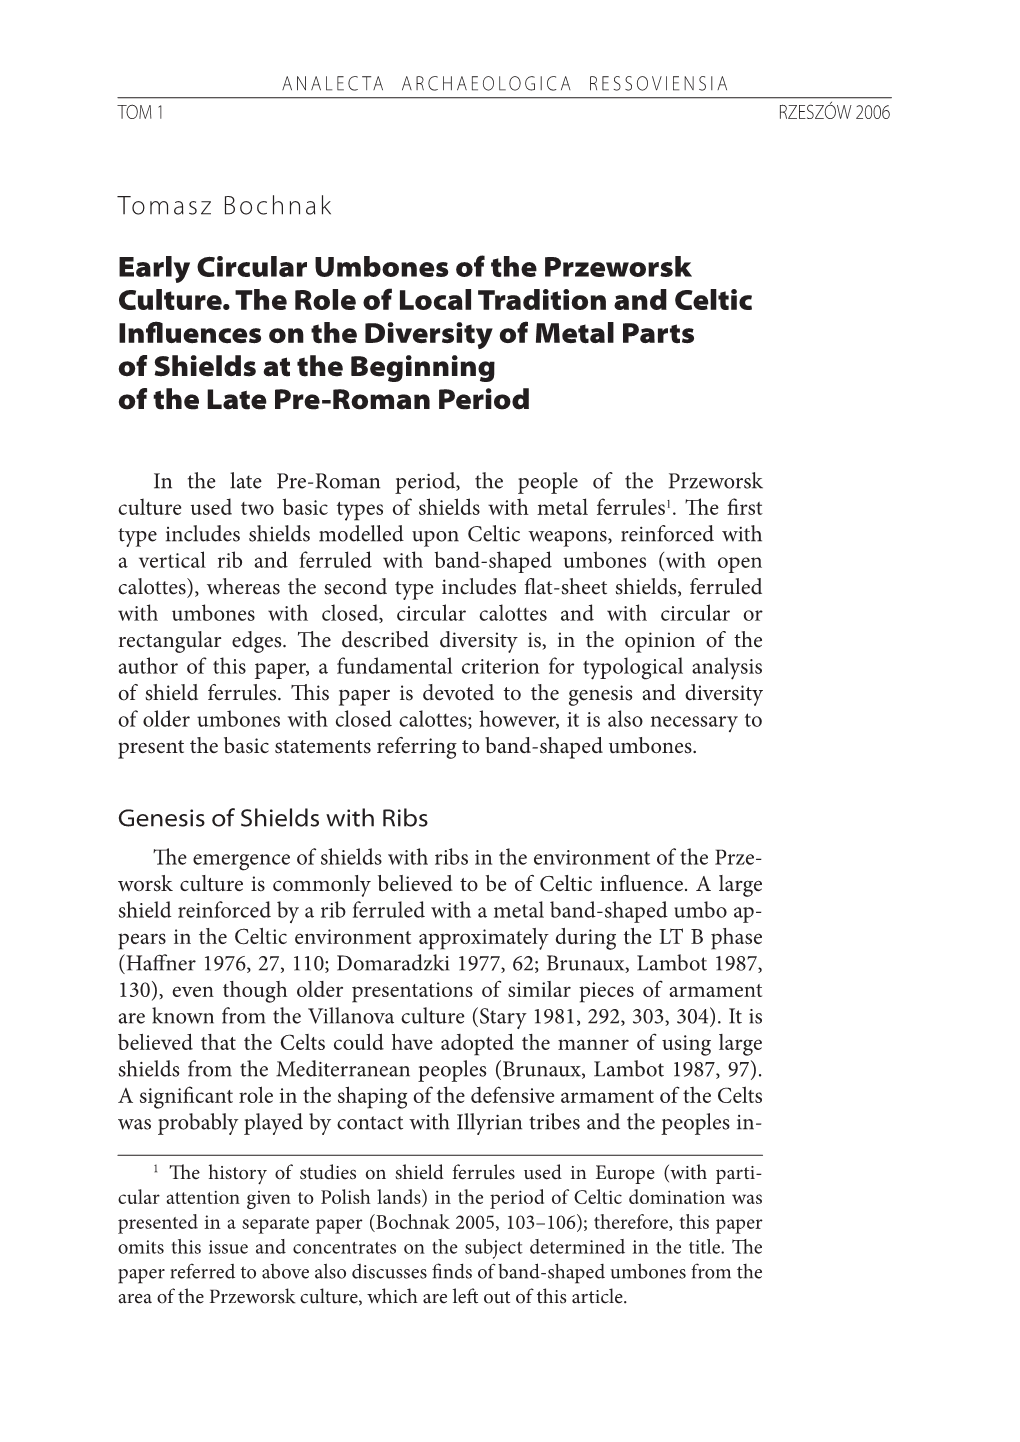 Early Circular Umbones of the Przeworsk Culture. the Role Of